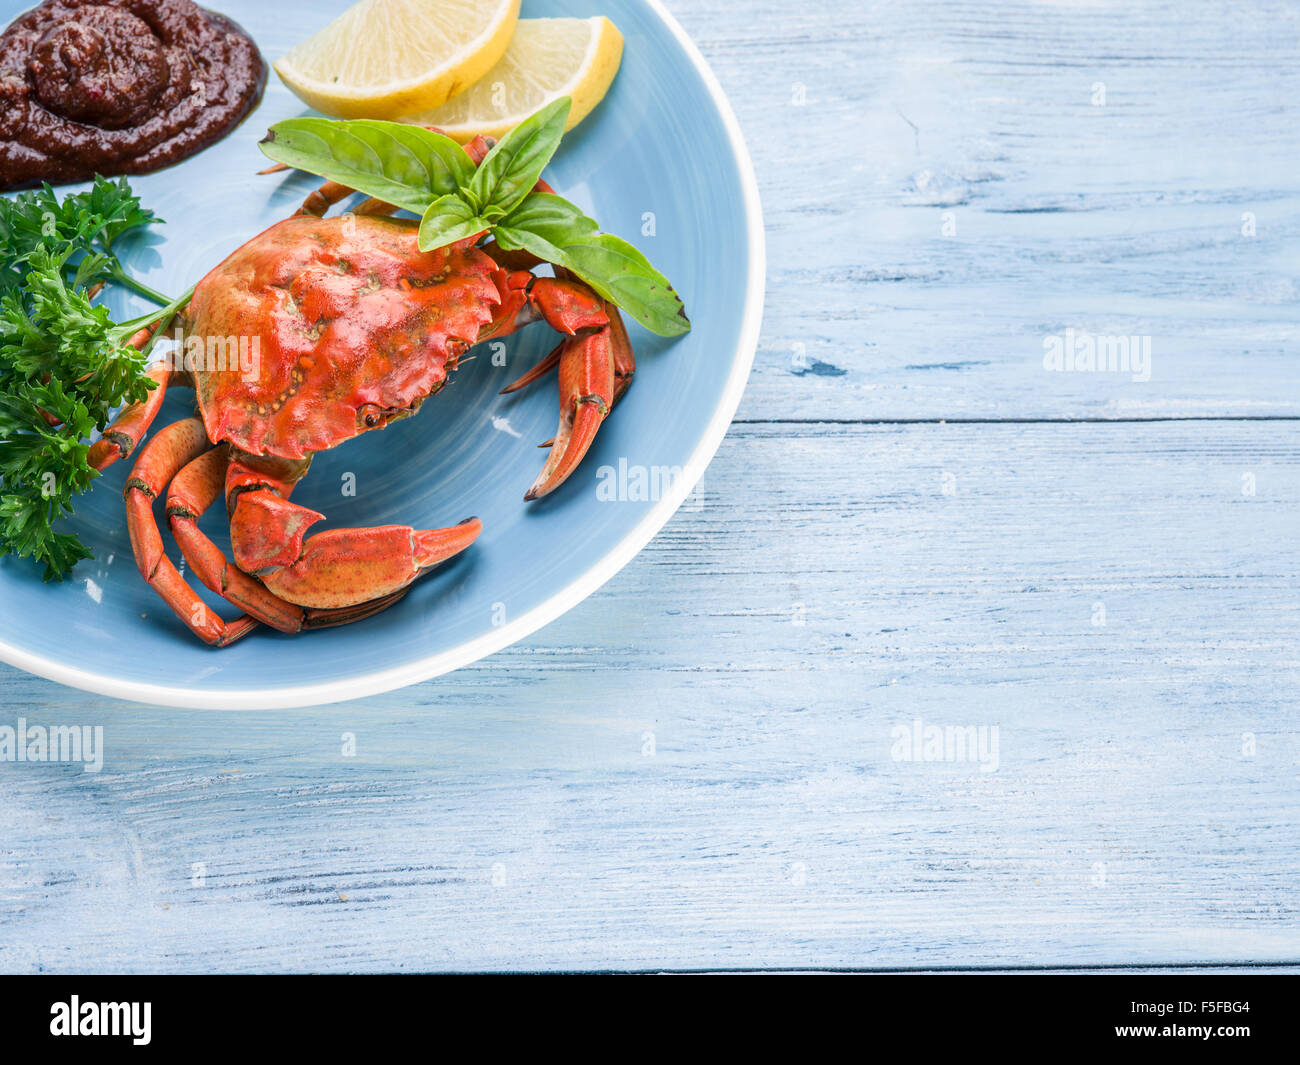 Seafood dish - cooked crab with lemon and herbs. Stock Photo